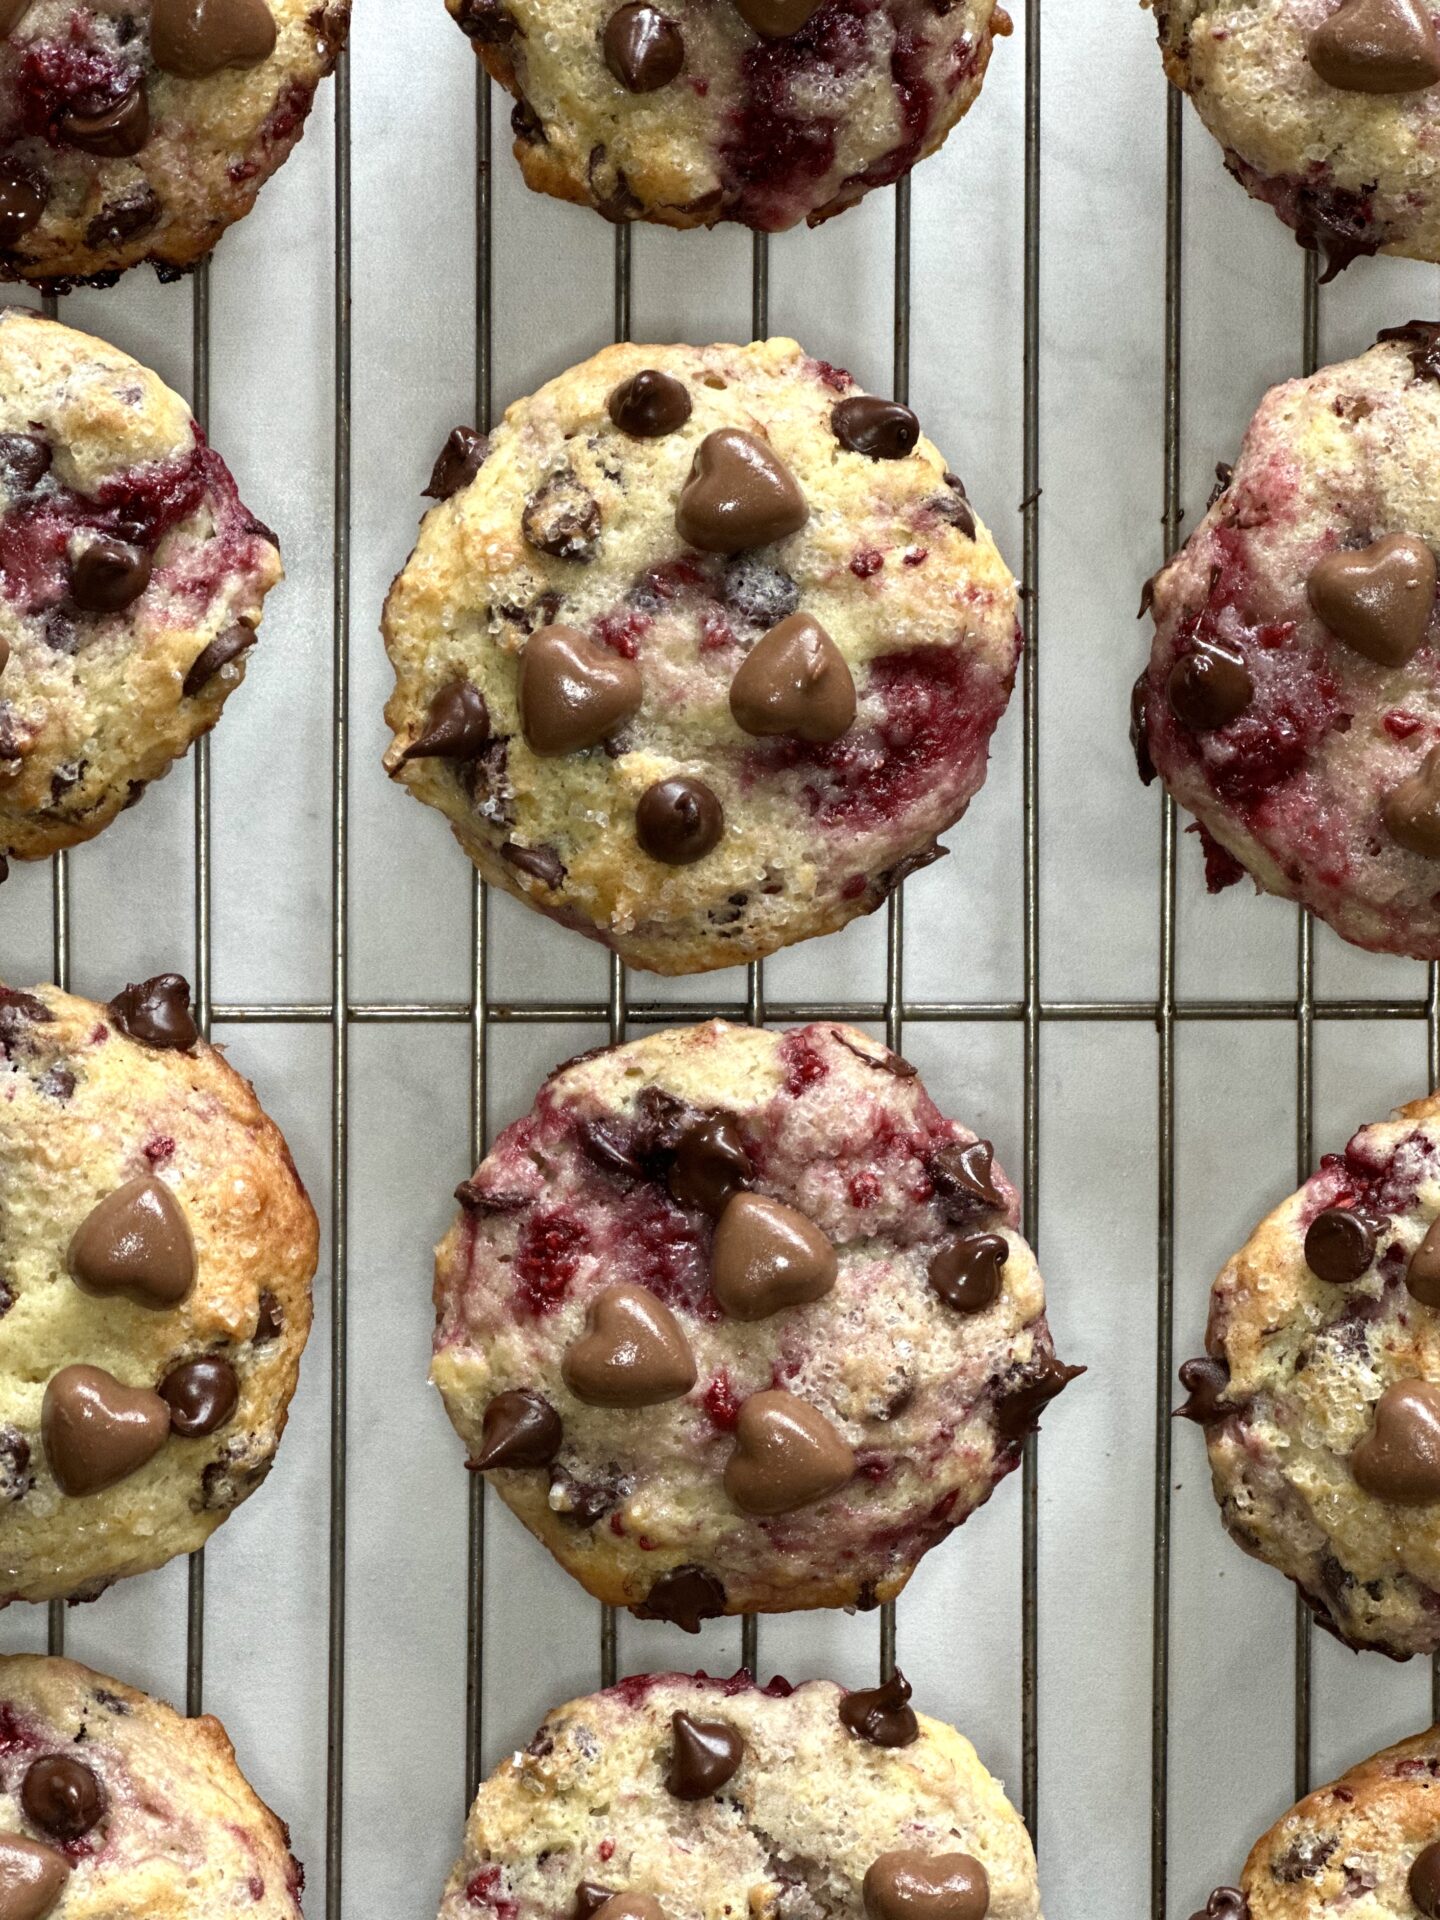 Freshly baked raspberry chocolate chip muffins, decorated for valentines day, seen from above, cooling on a rack